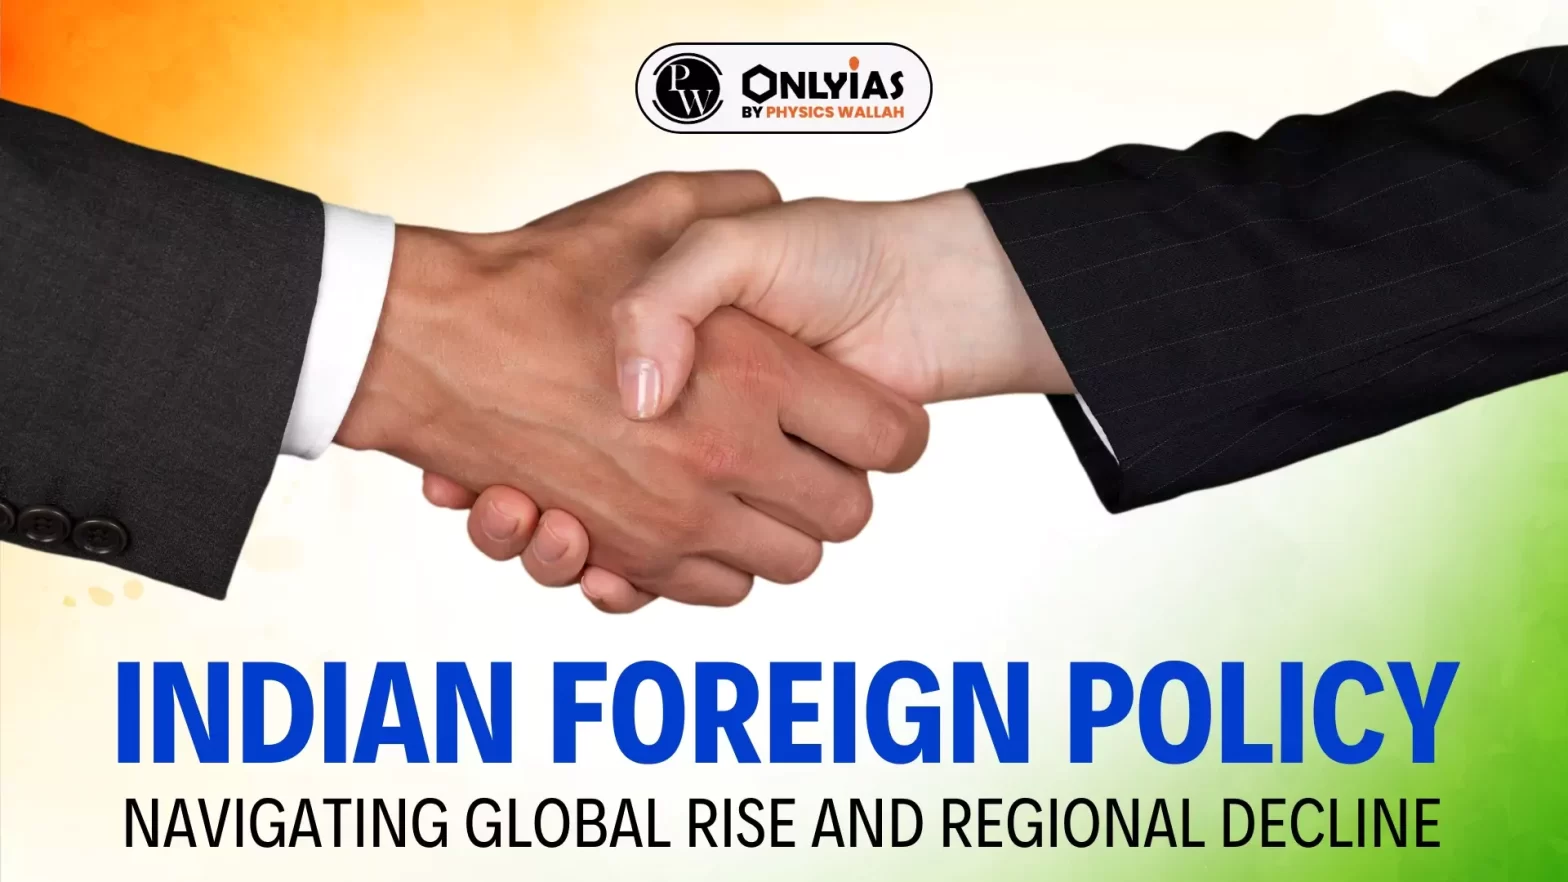 Indian Foreign Policy: Navigating Global Rise and Regional Decline